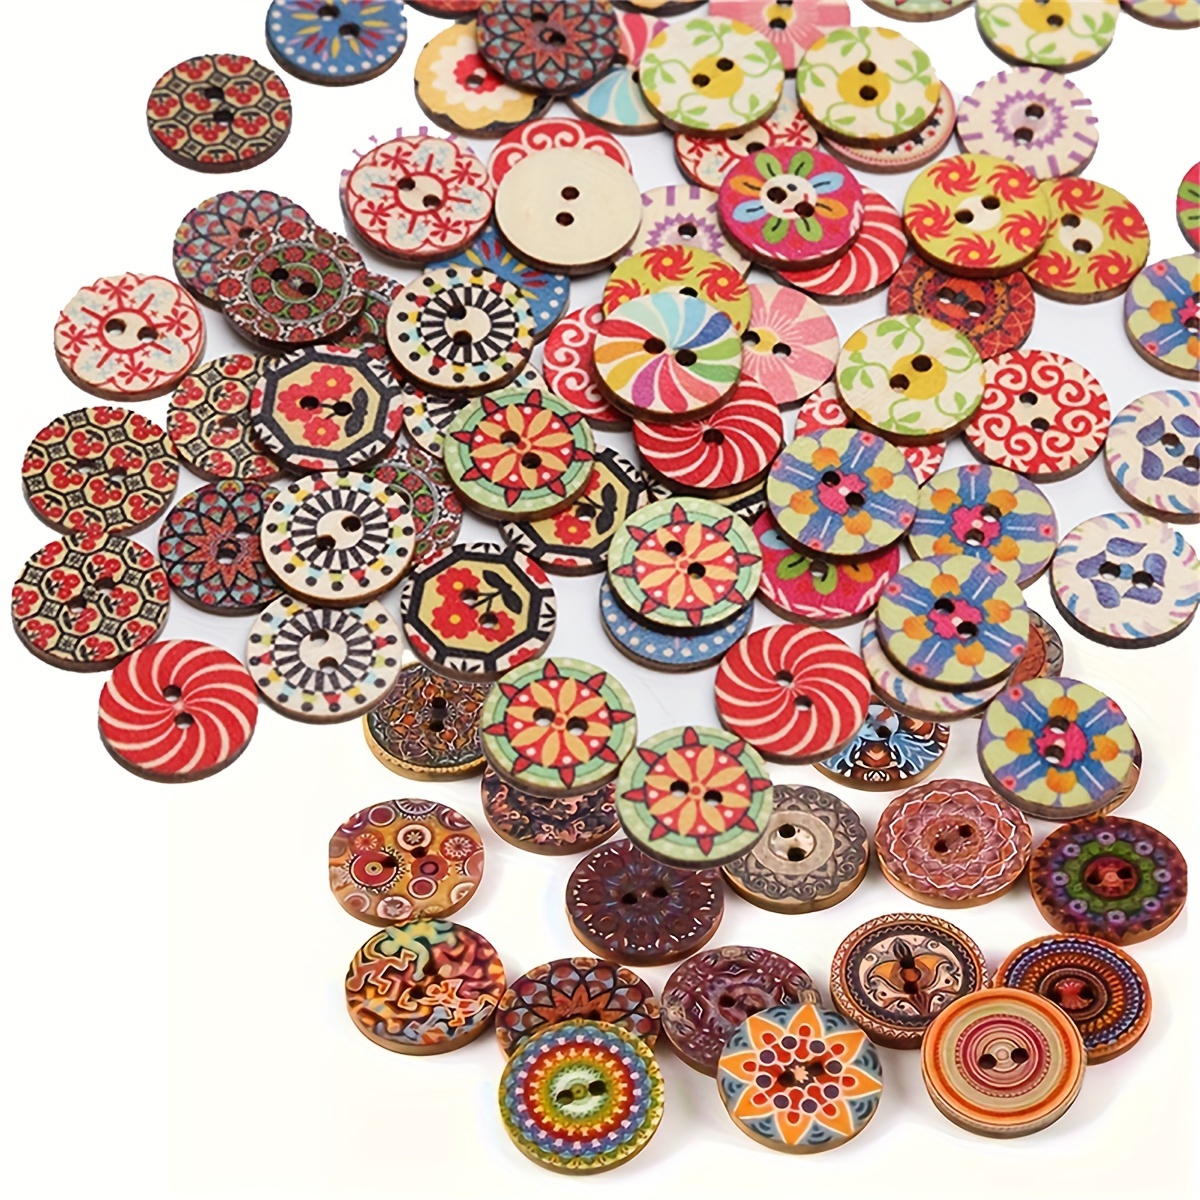 50 Pcs 20mm Wooden Buttons, 3/4 Wood Buttons Craft Sewing Button for  Crafts Sewing DIY